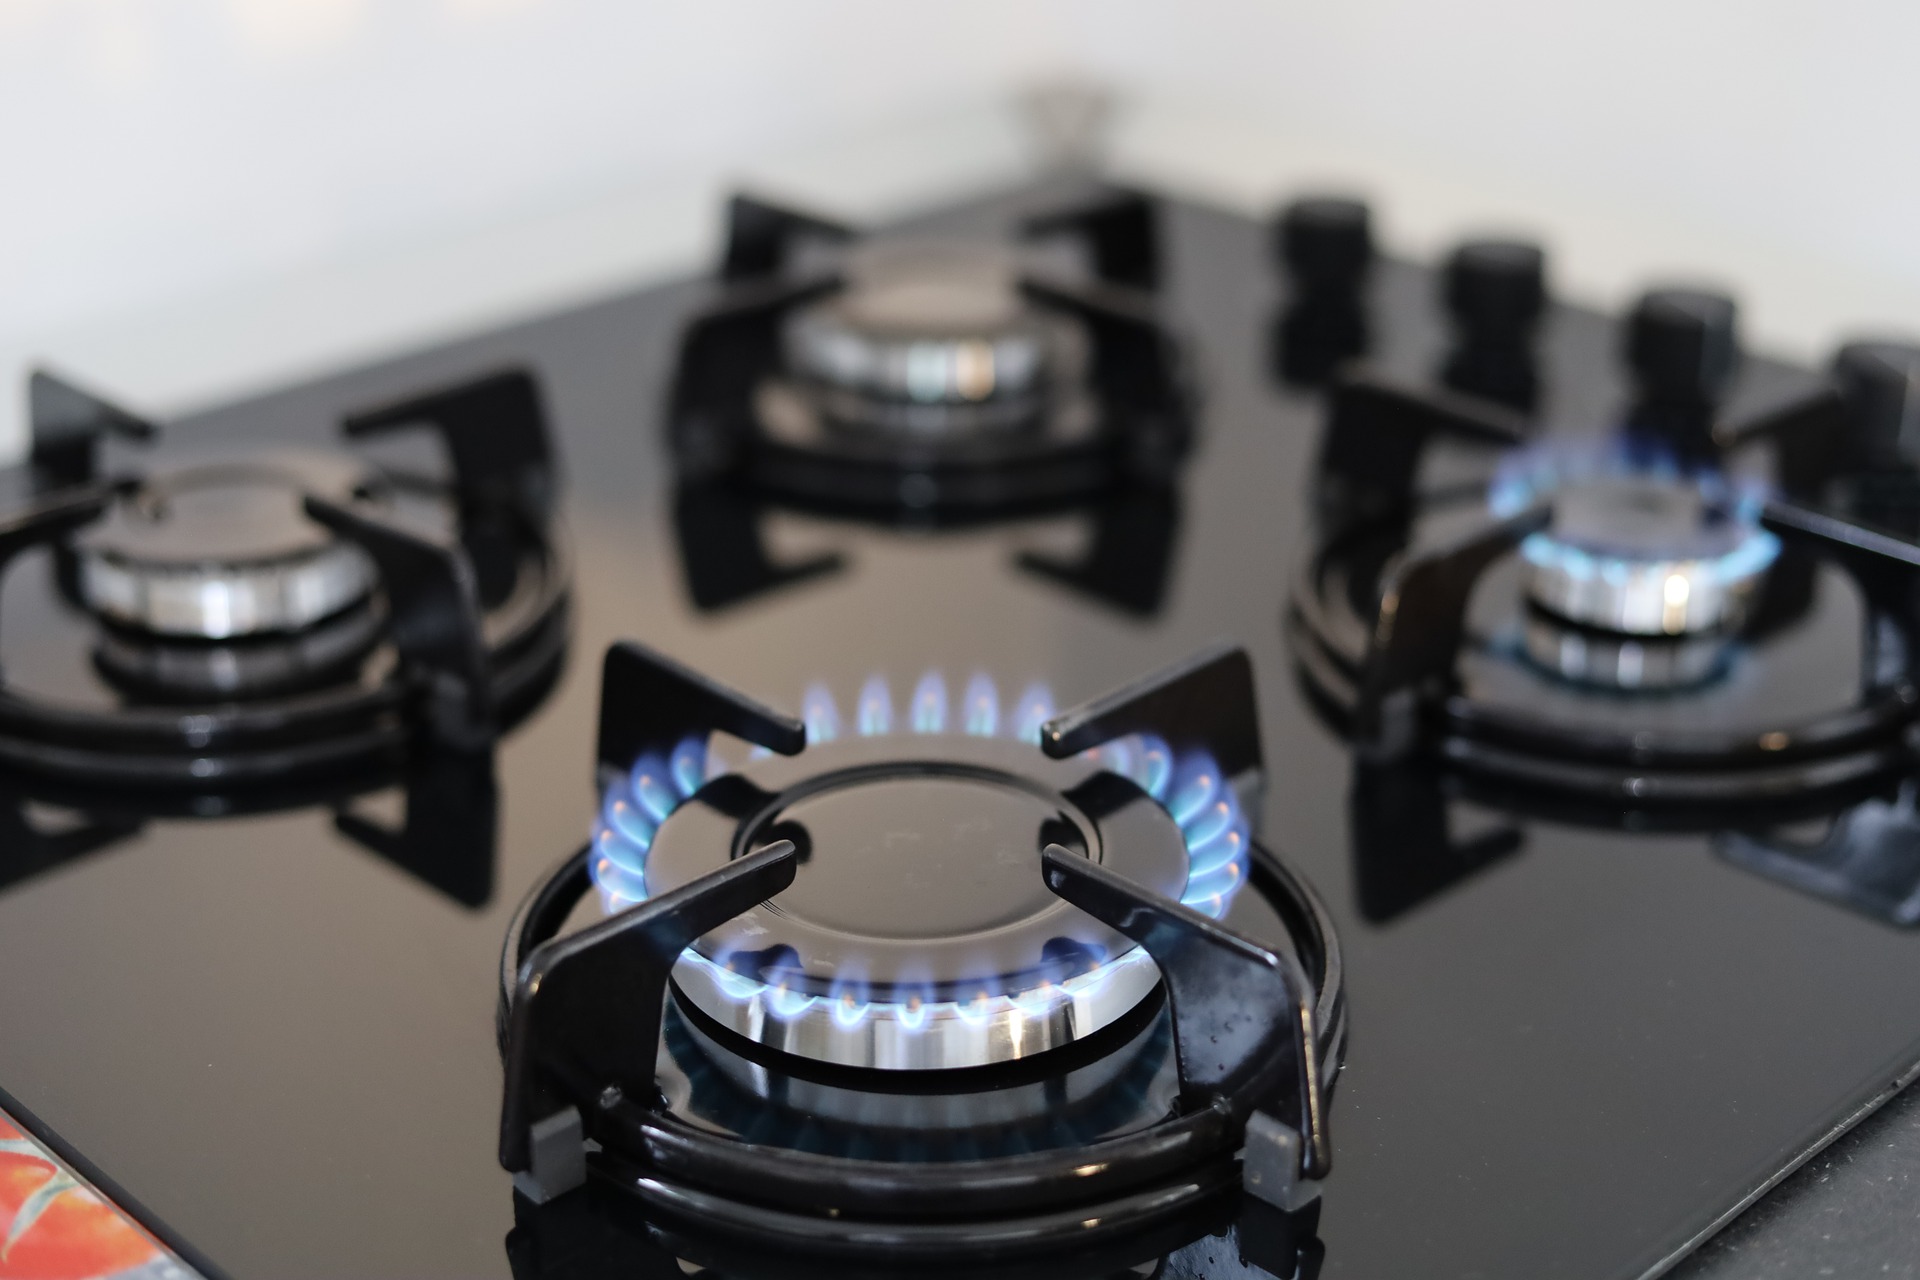 A US federal agency is considering a ban on gas stoves